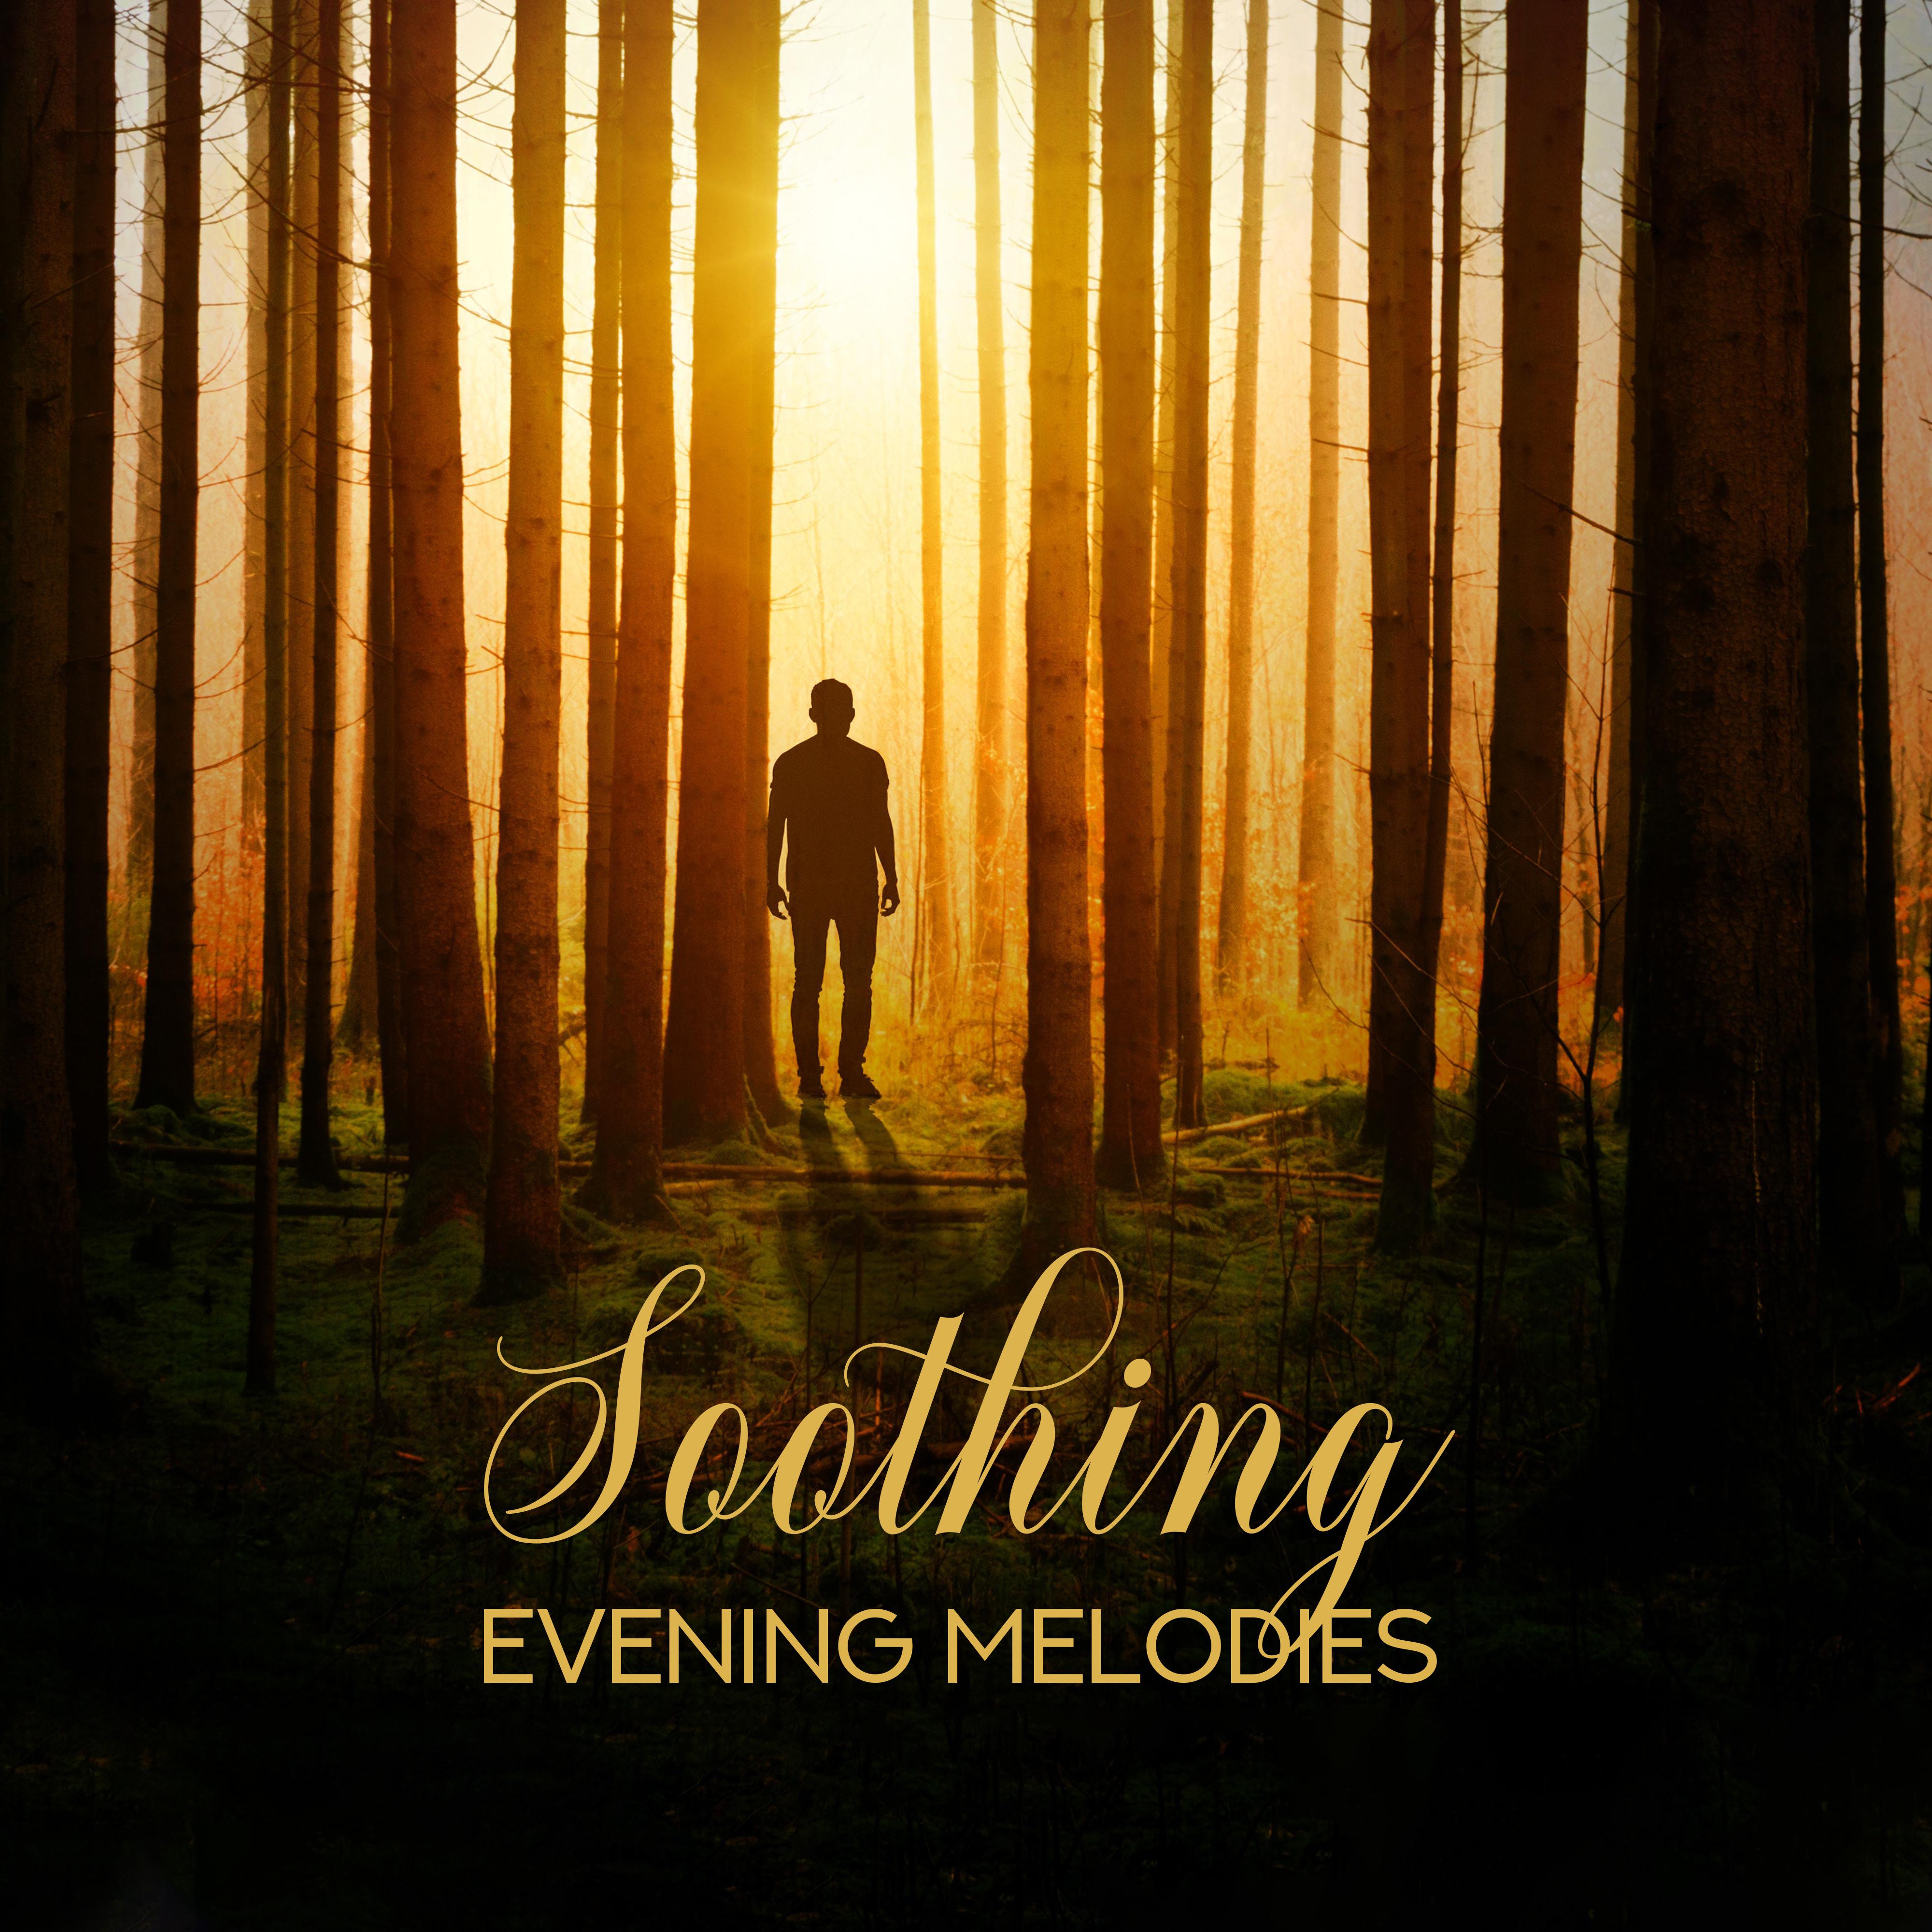 Soothing Evening Melodies: 2019 Compilation of New Age Delicate Relaxation Music, Nature Songs Created for Loose the Body, Calm Sleeping All Night Long, Restore Your Vital Energy